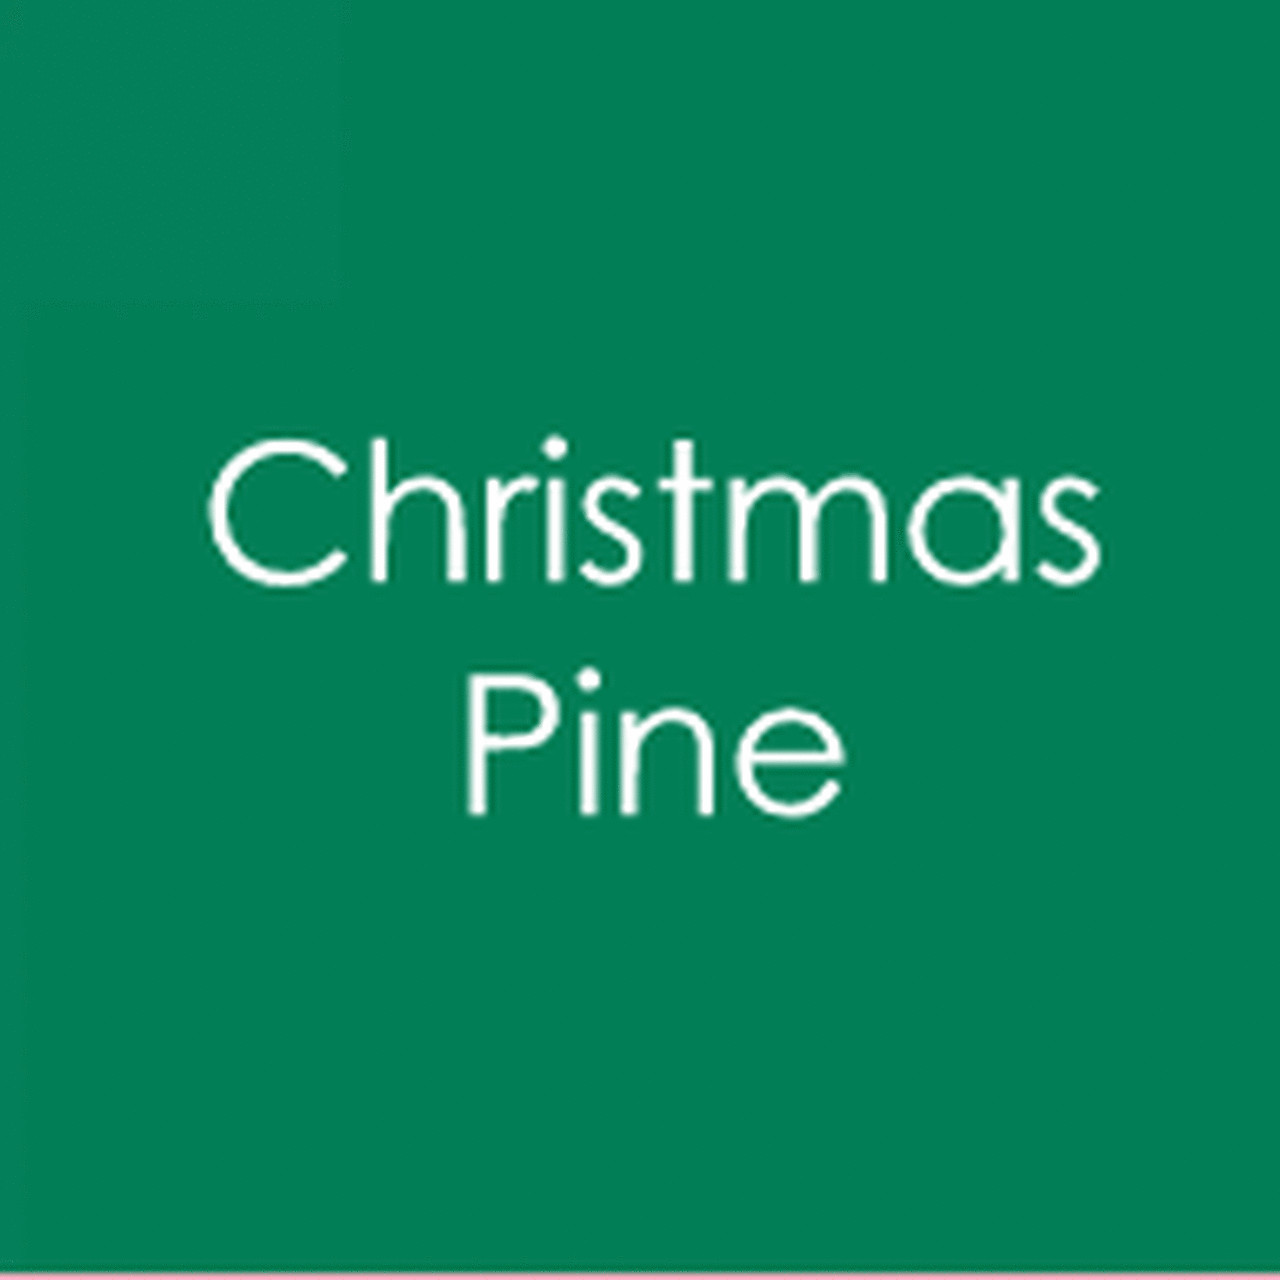 Christmas Pine - Heavy Base Weight - Card Stock